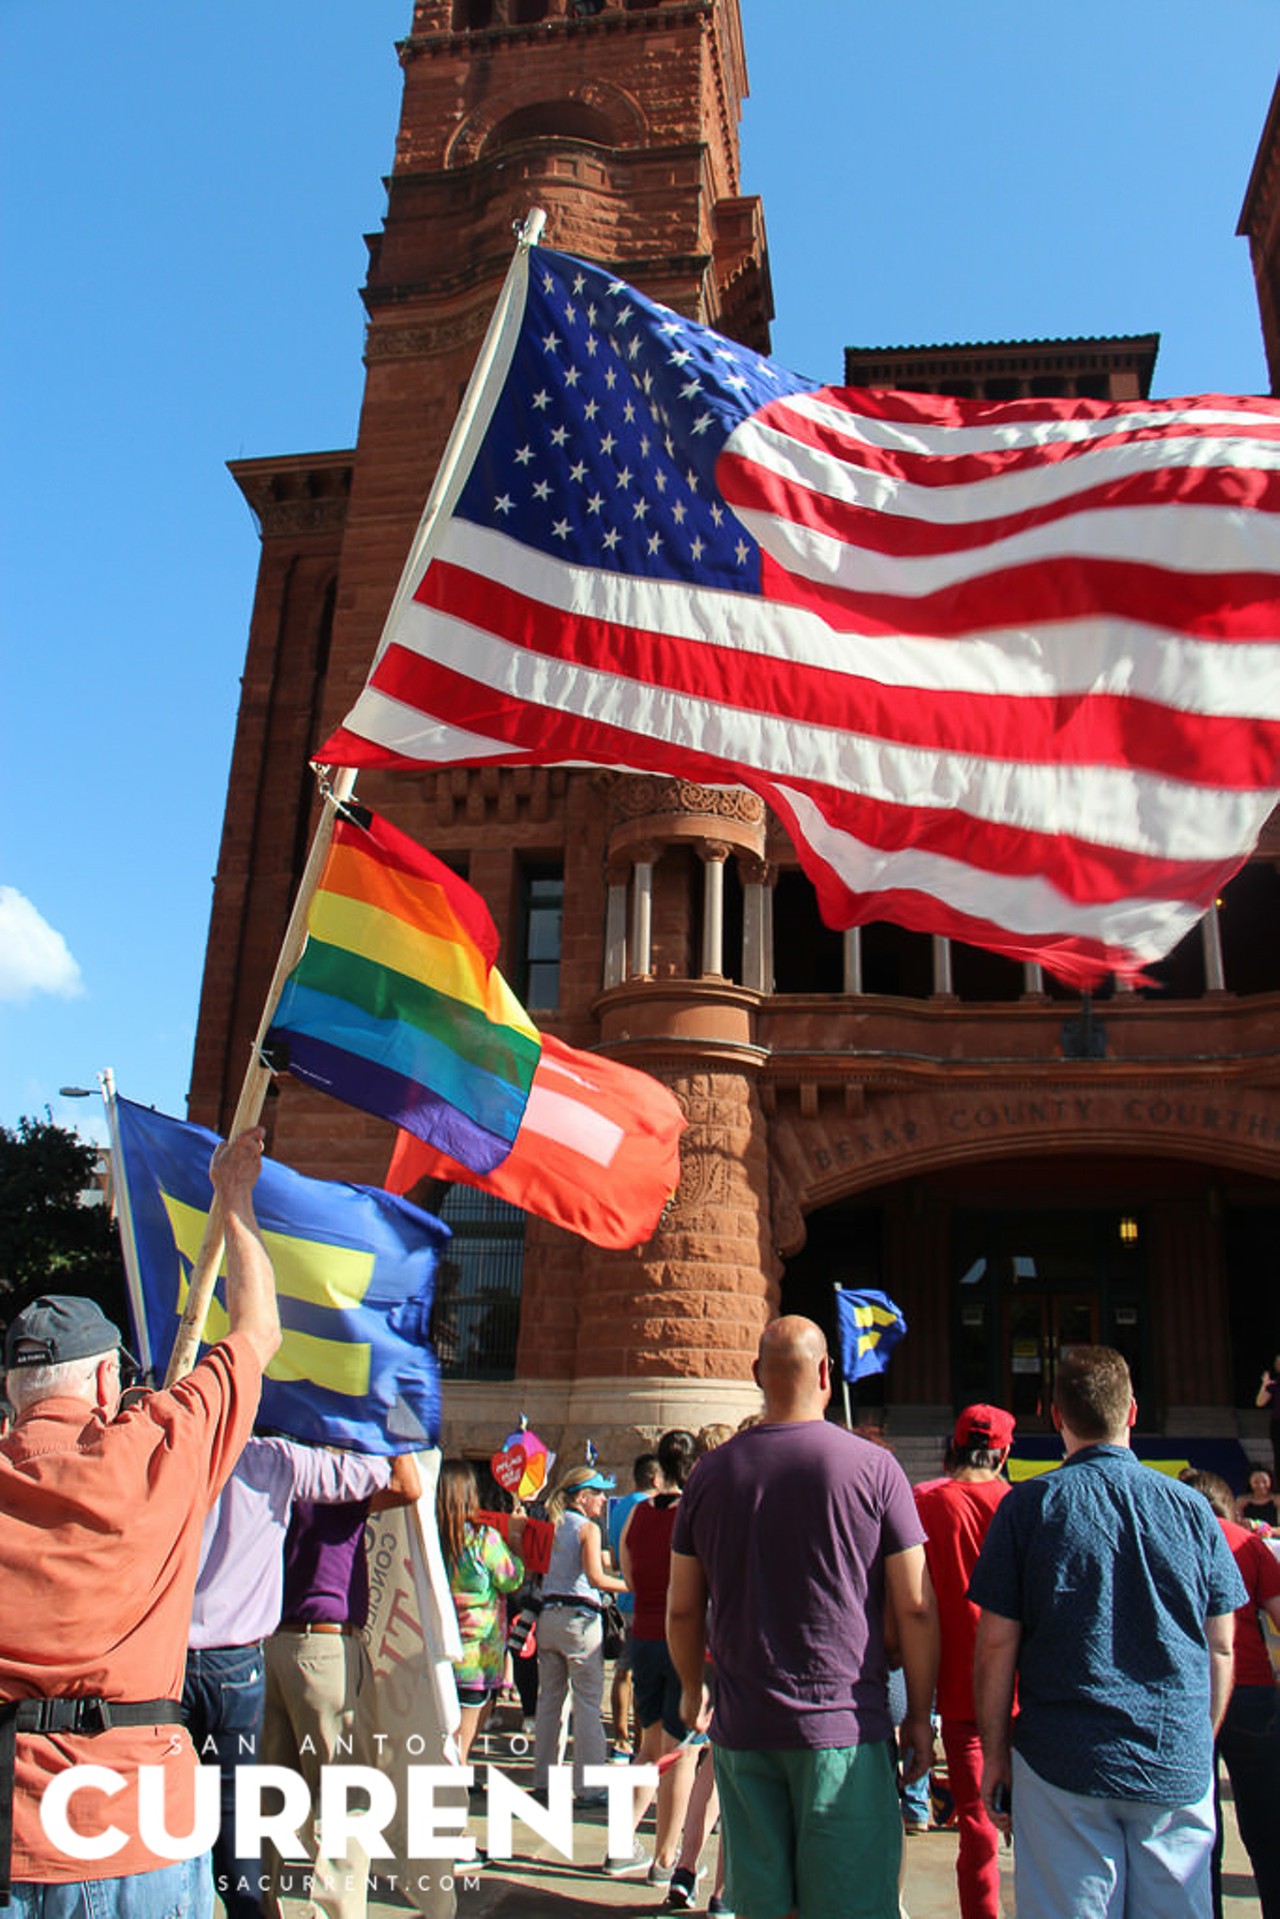 48 Photos From Friday's Celebratory Marriage Equality Rally